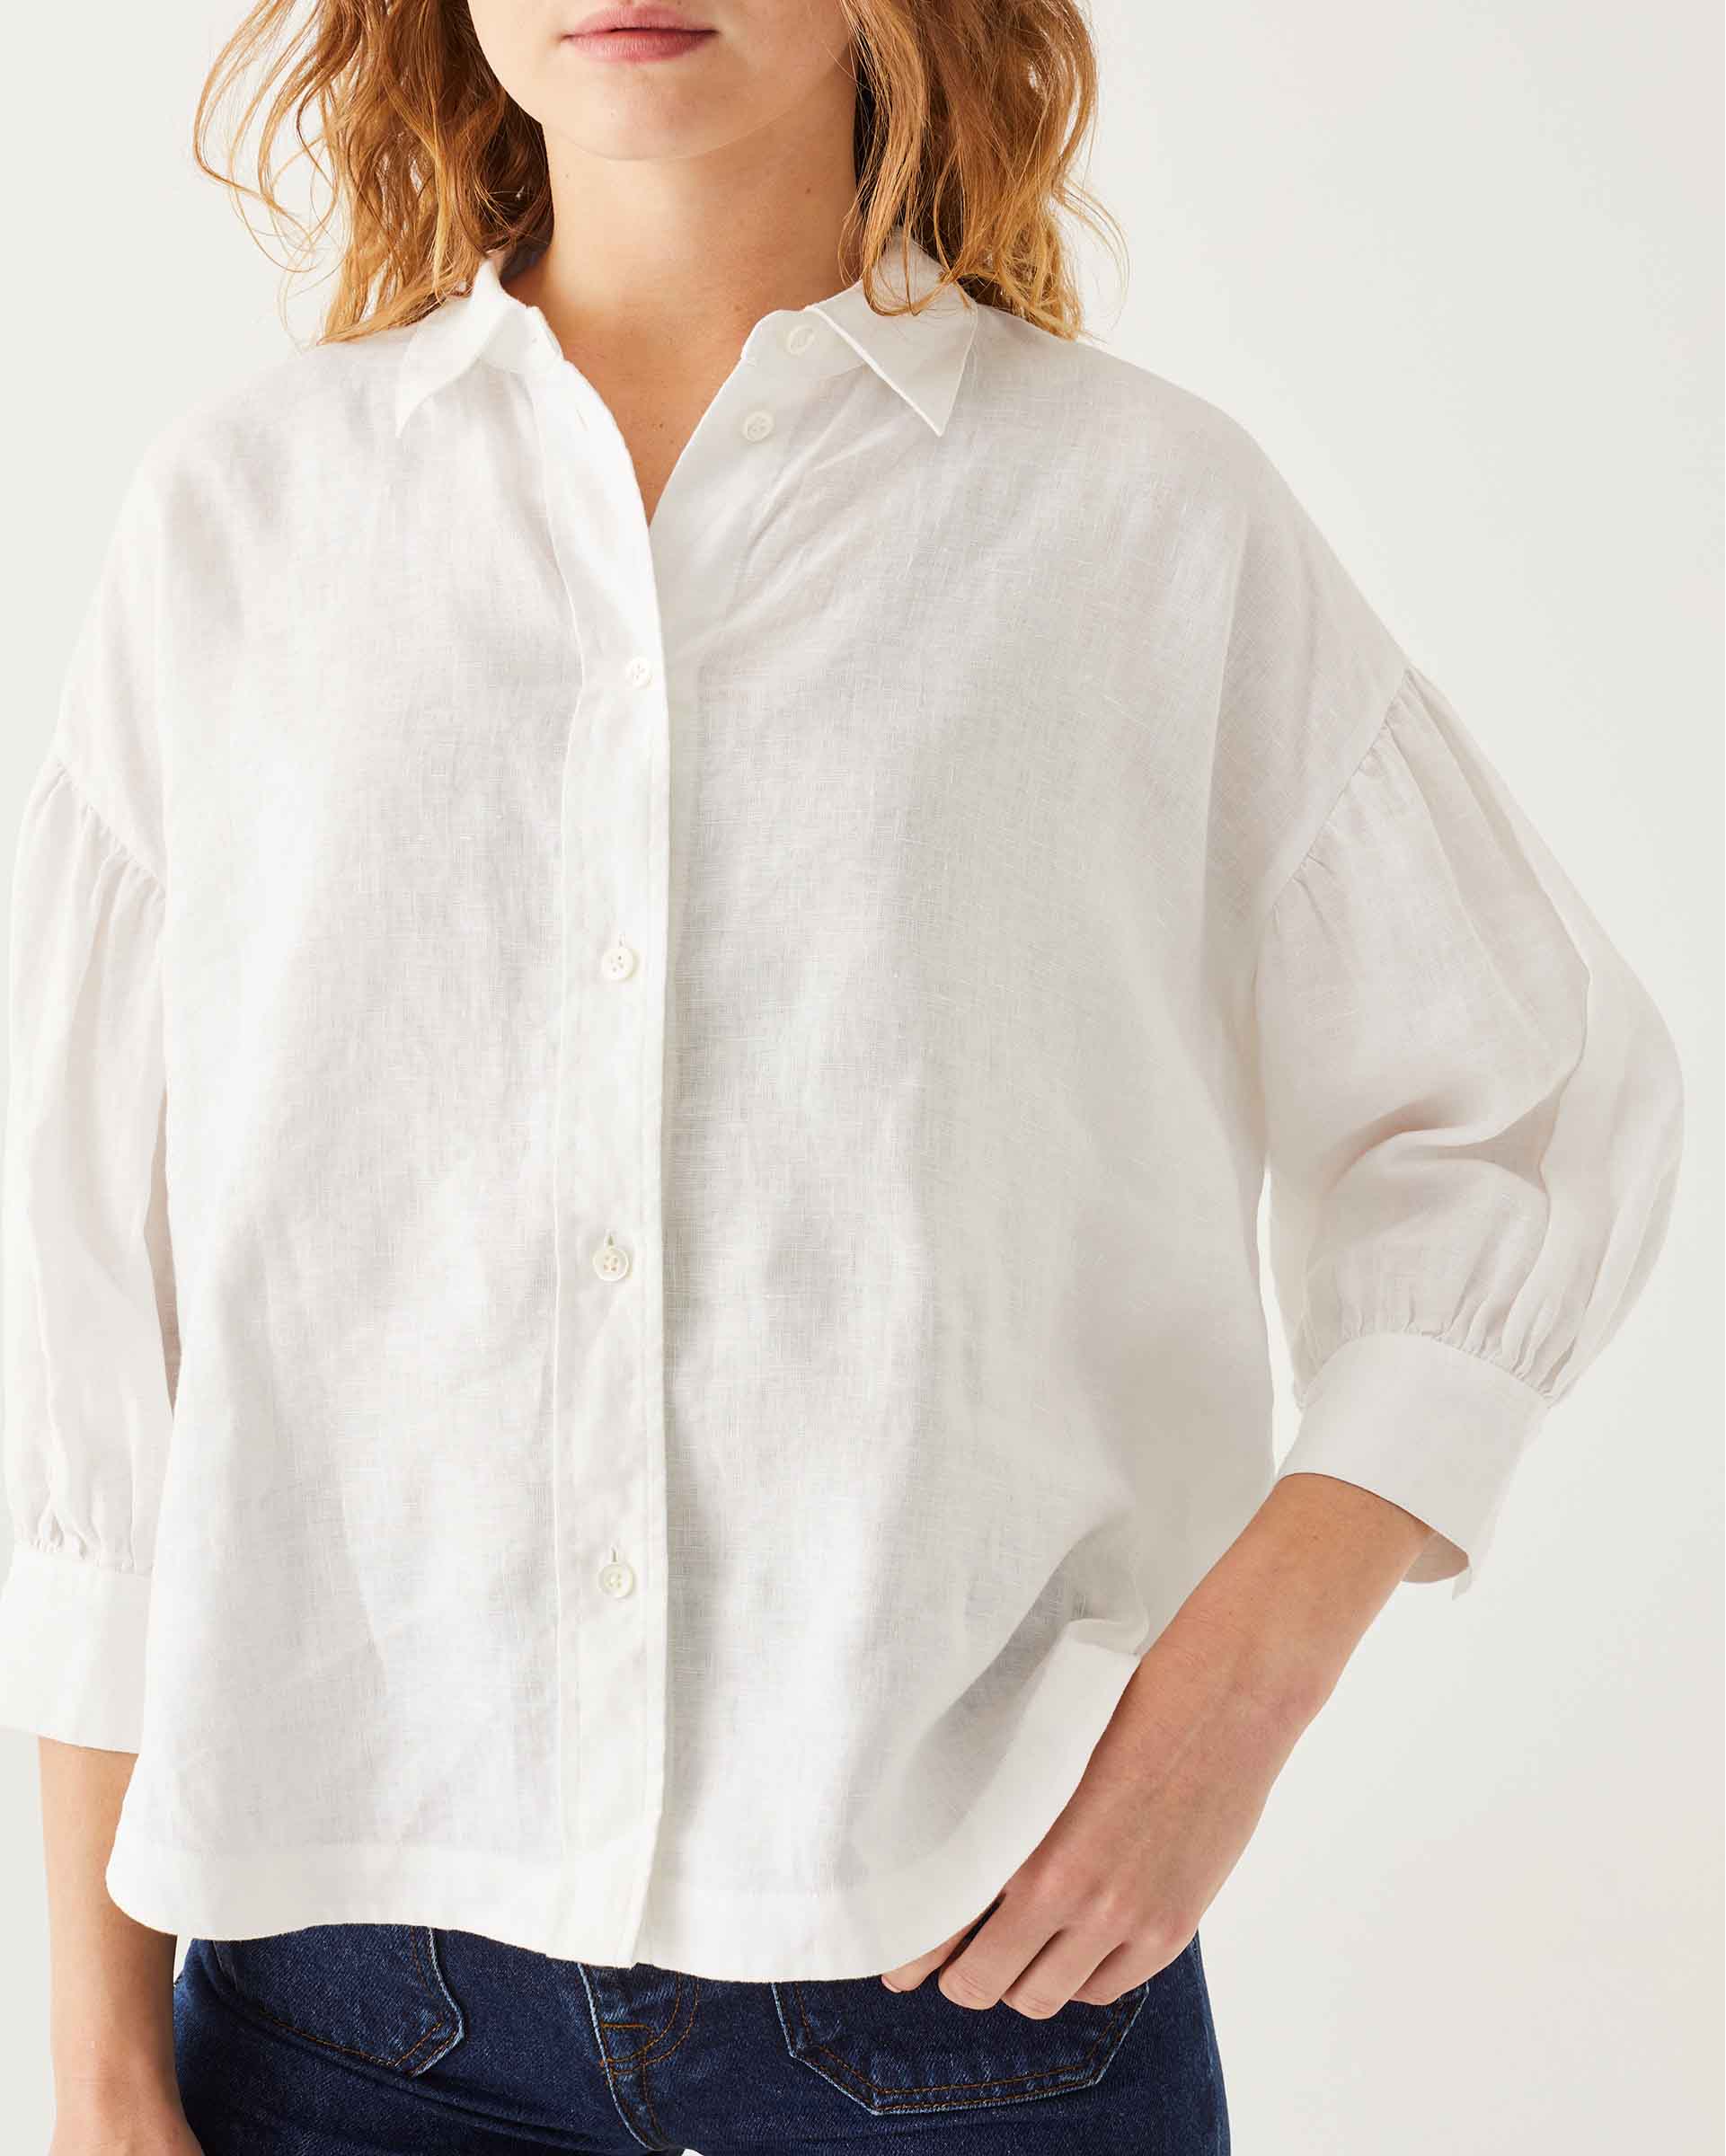 front detail of female wearing white linen shirt with button-down and collar on white background